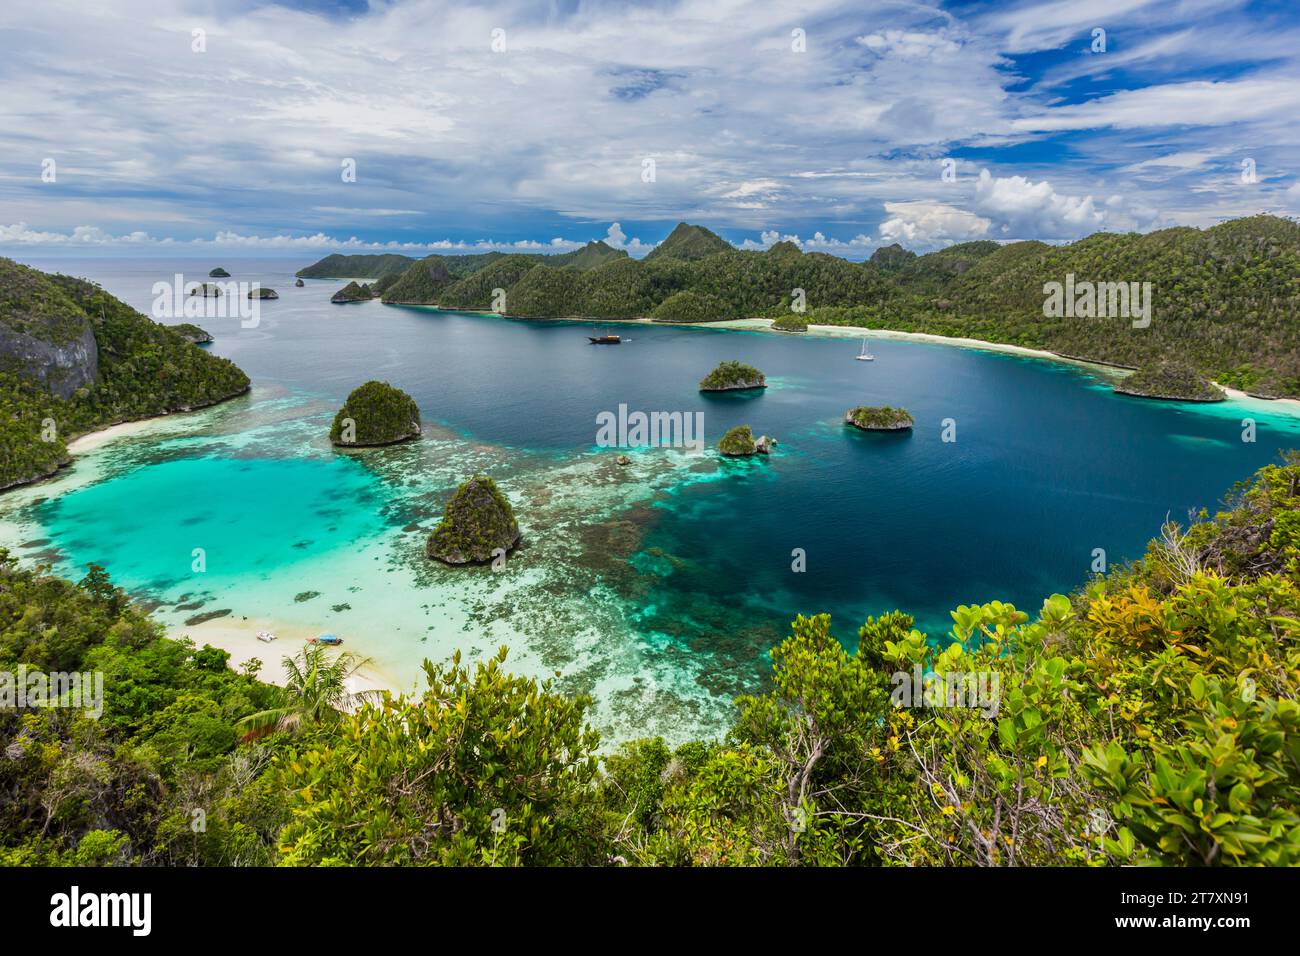 A view from on top of the small islets of the natural protected harbor in Wayag Bay, Raja Ampat, Indonesia, Southeast Asia, Asia Stock Photo